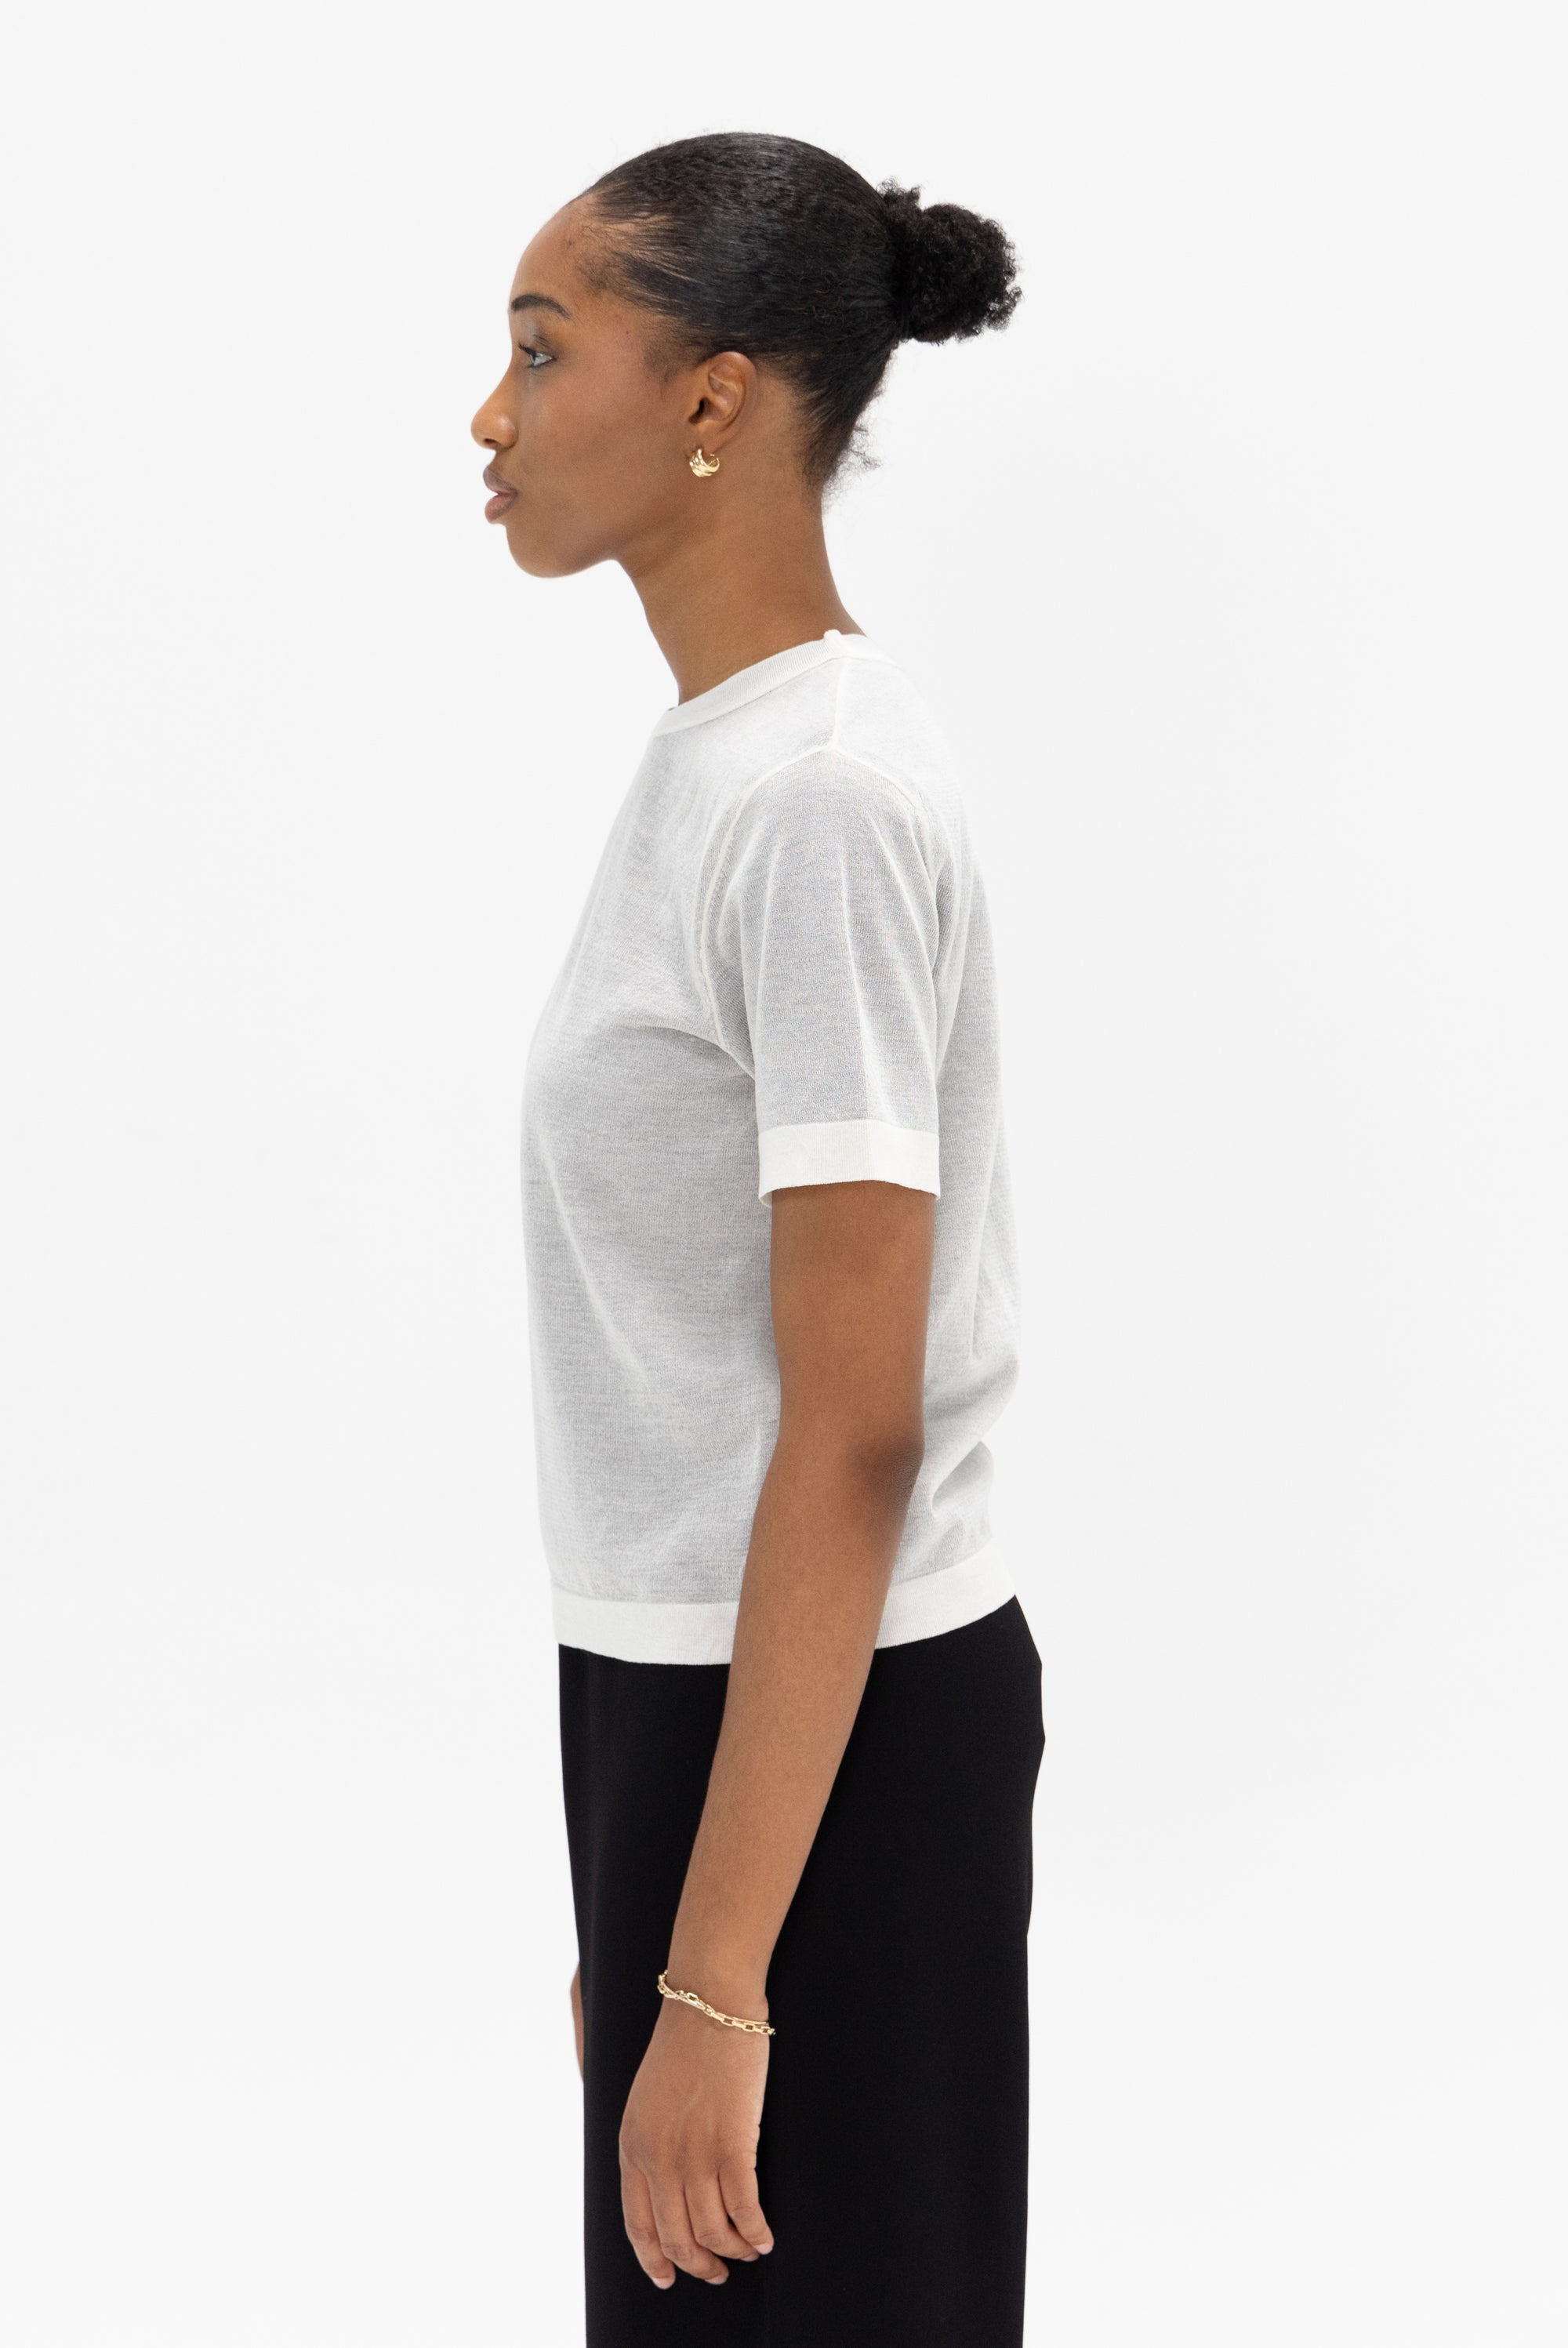 PROENZA SCHOULER WHITE LABEL - Powell Sheer Knit Top, Off-White and Black